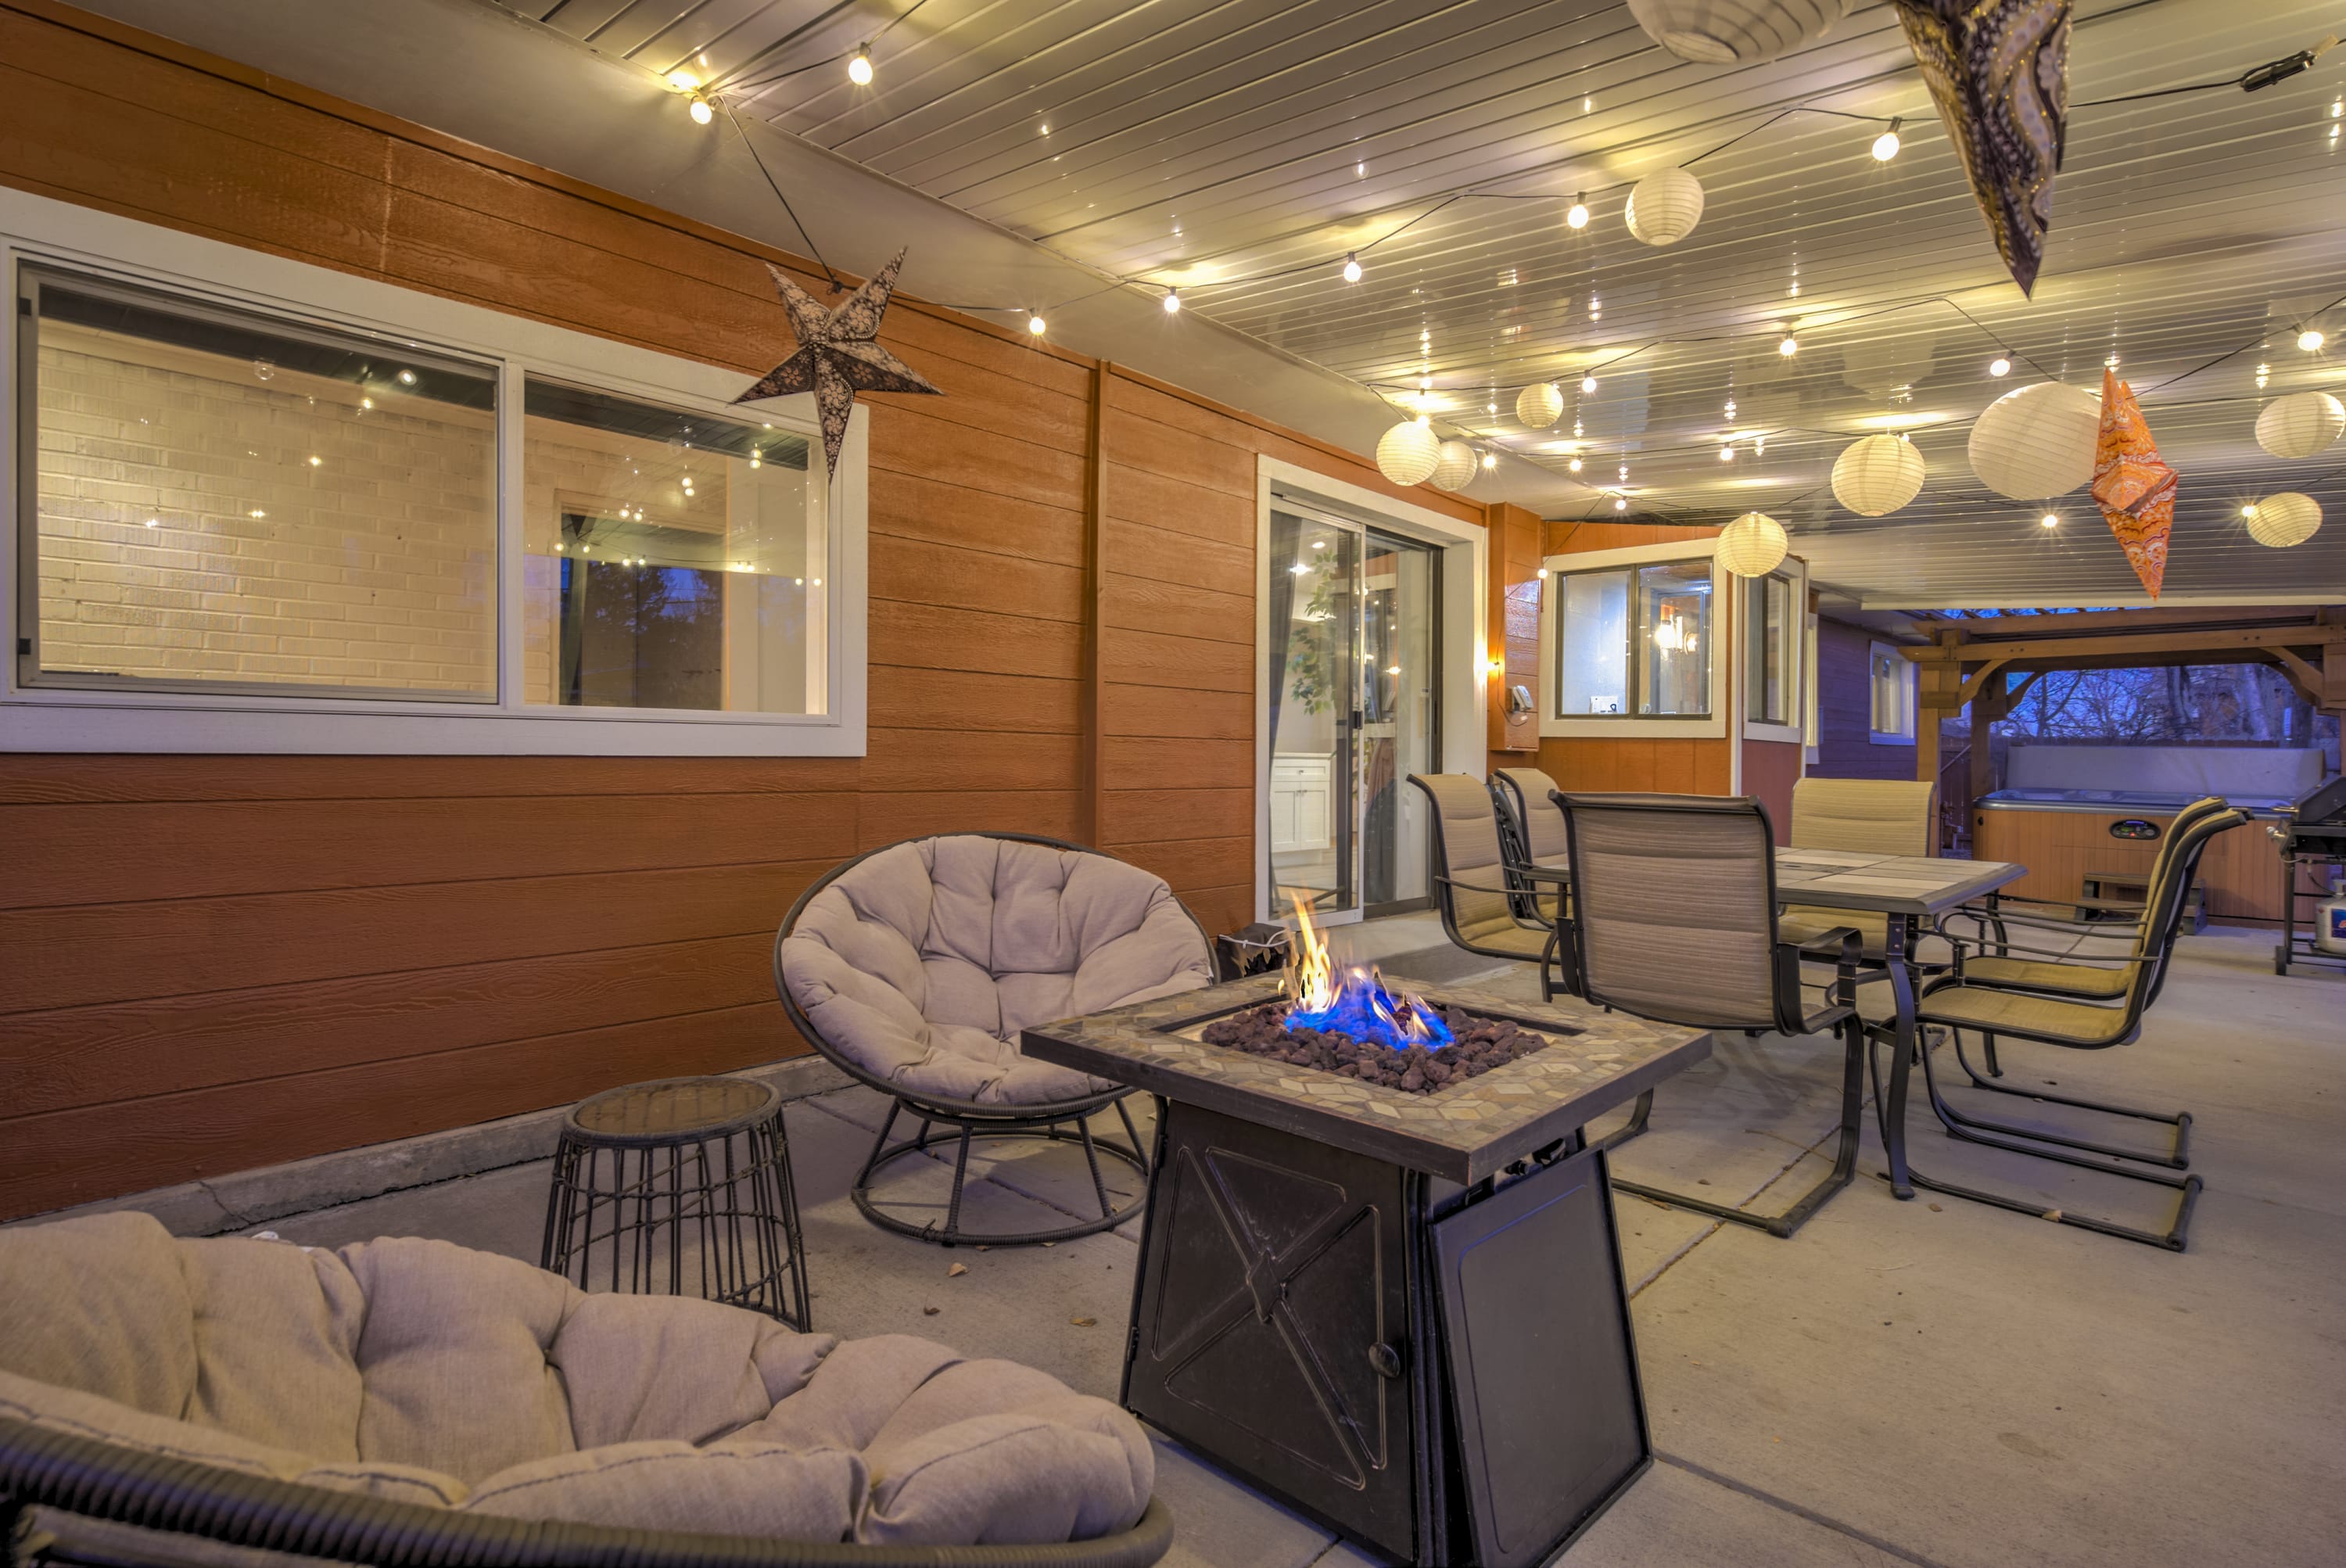 Property Image 1 - 4BR | Broadmoor Retreat | Hottub, Firepit, Near Trails - Updated Outdoor Space with Yard Games